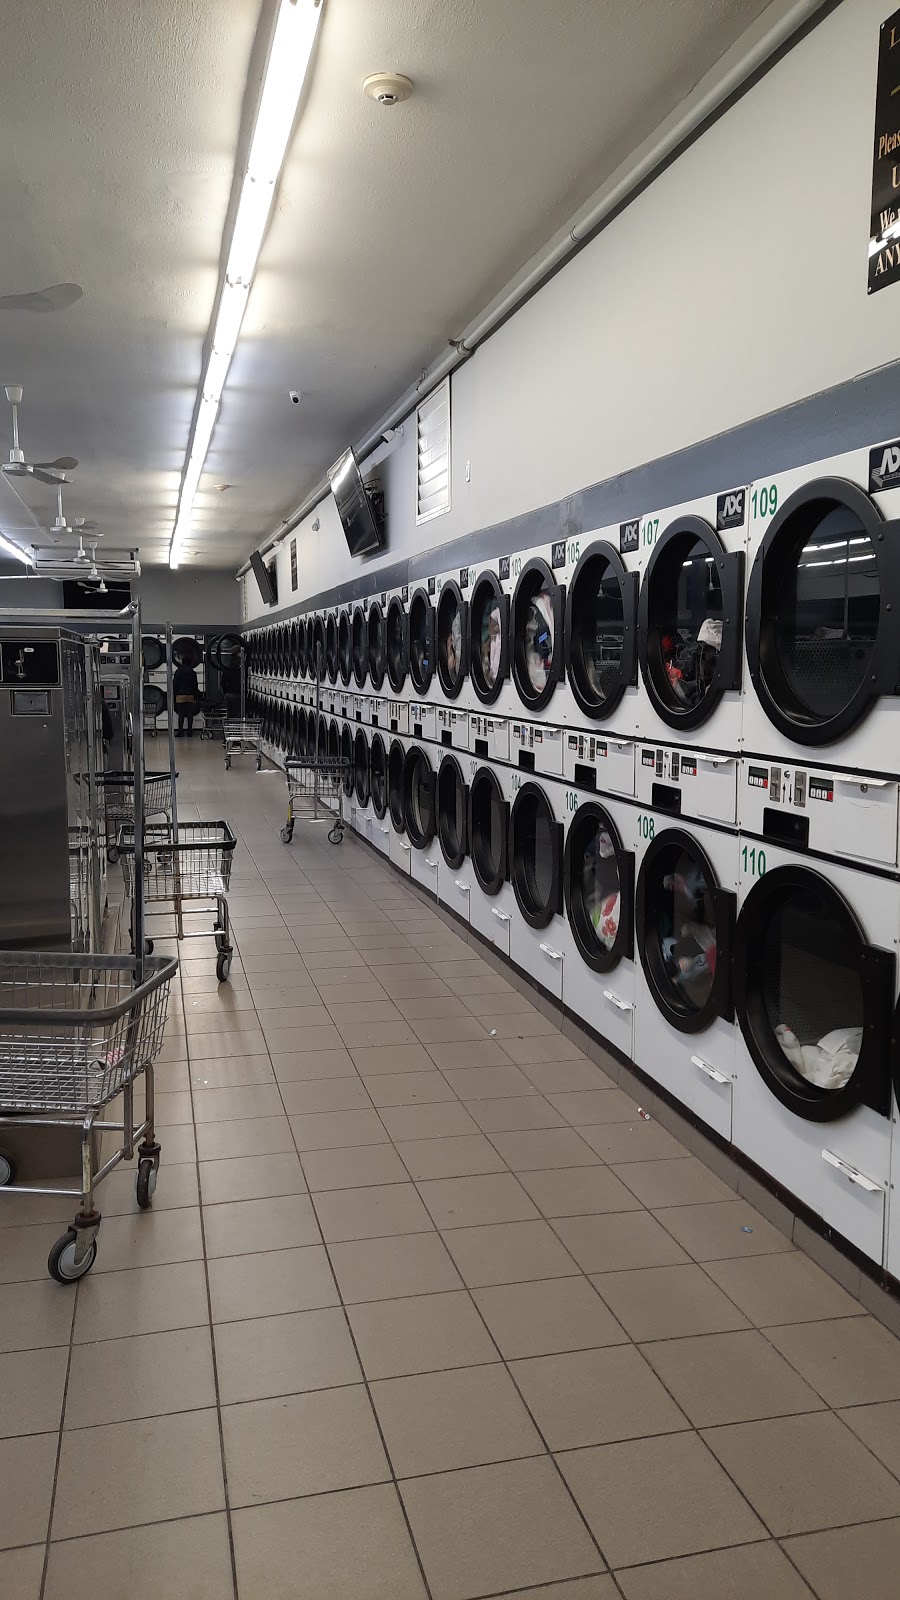 Laundry Depot Brentwood Road | 1559 Brentwood Rd, Bay Shore, NY 11706 | Phone: (631) 647-5620